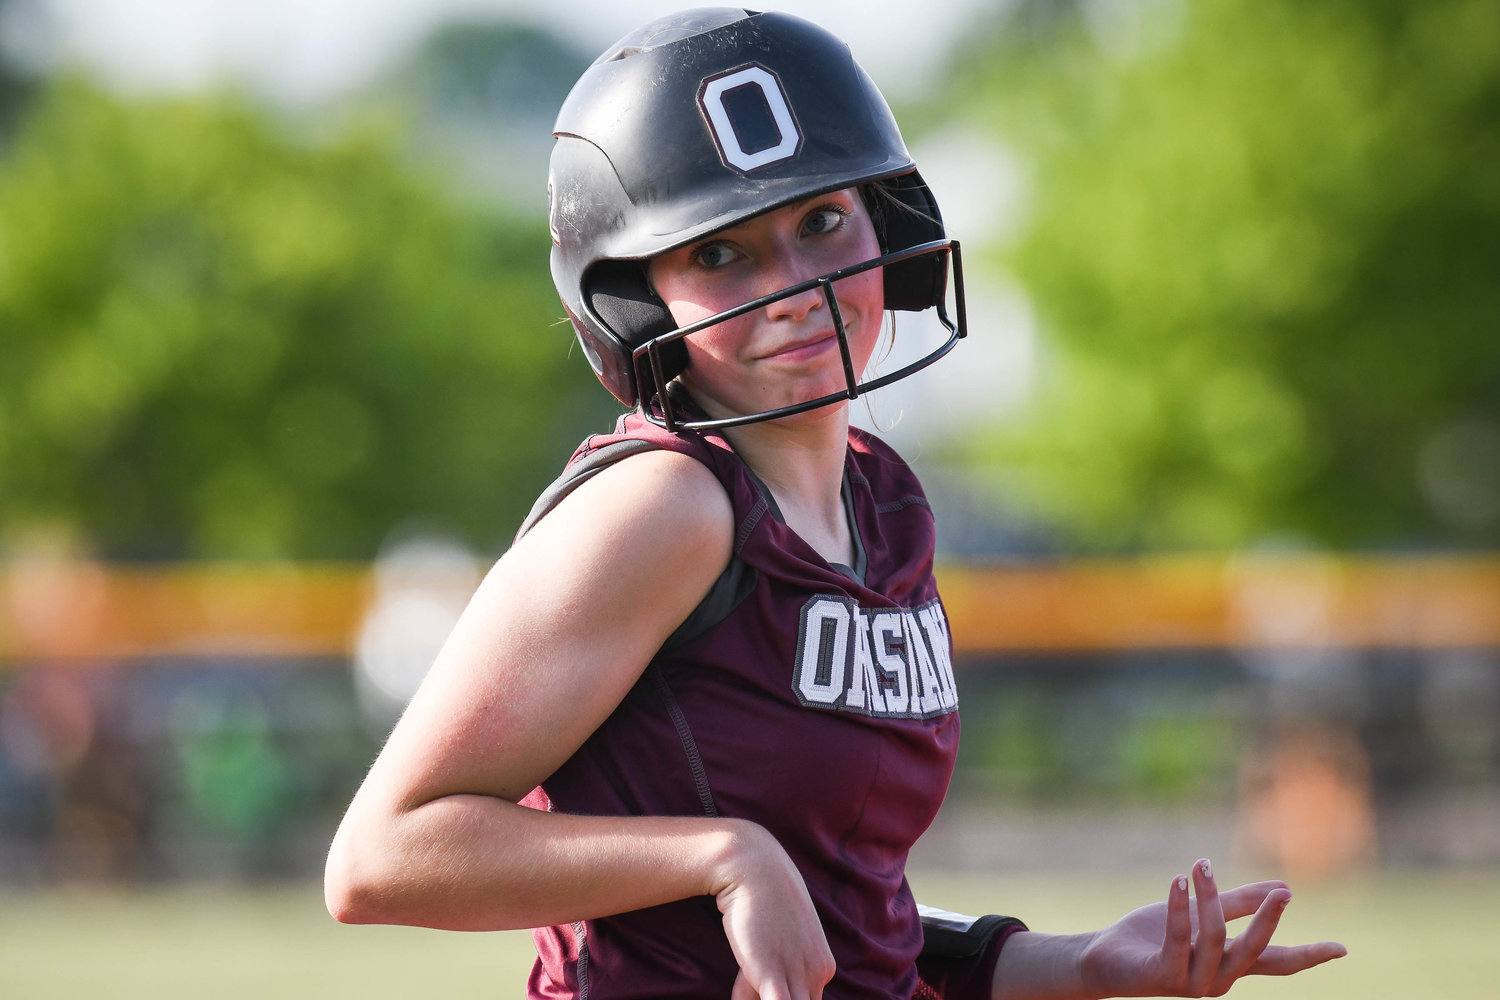 Oriskany's Juliet Tagaliaferri was among the players selected to the NYSSCOGS Class D all-state team. She was a key player for the team's run to an appearance in the state championship.